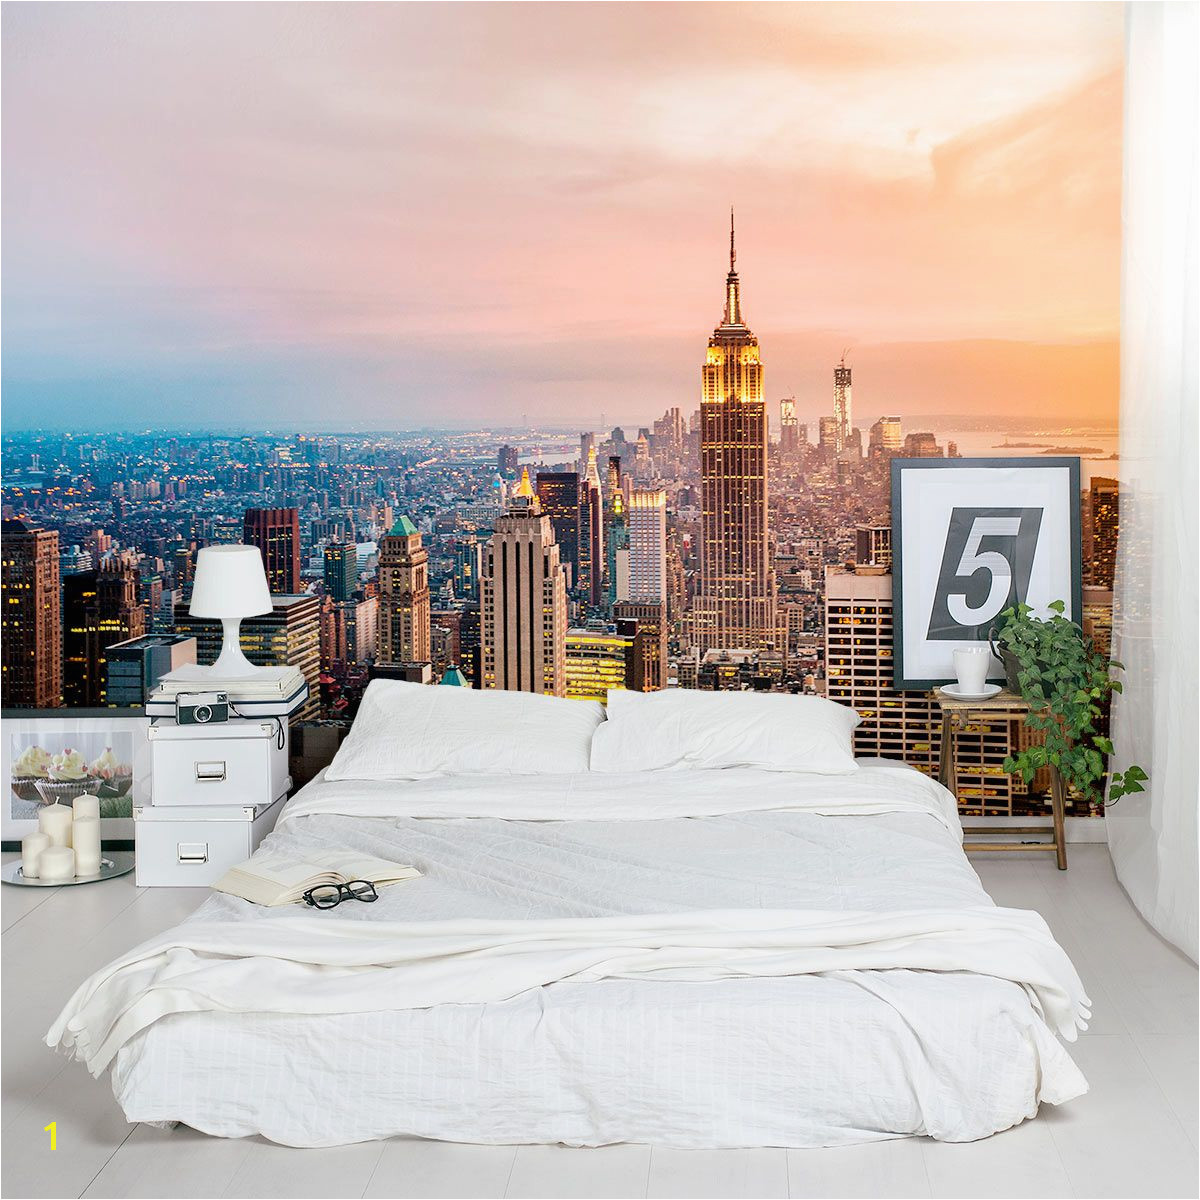 New York Wall Murals for Bedrooms New York Skyline Wall Mural Home Decor